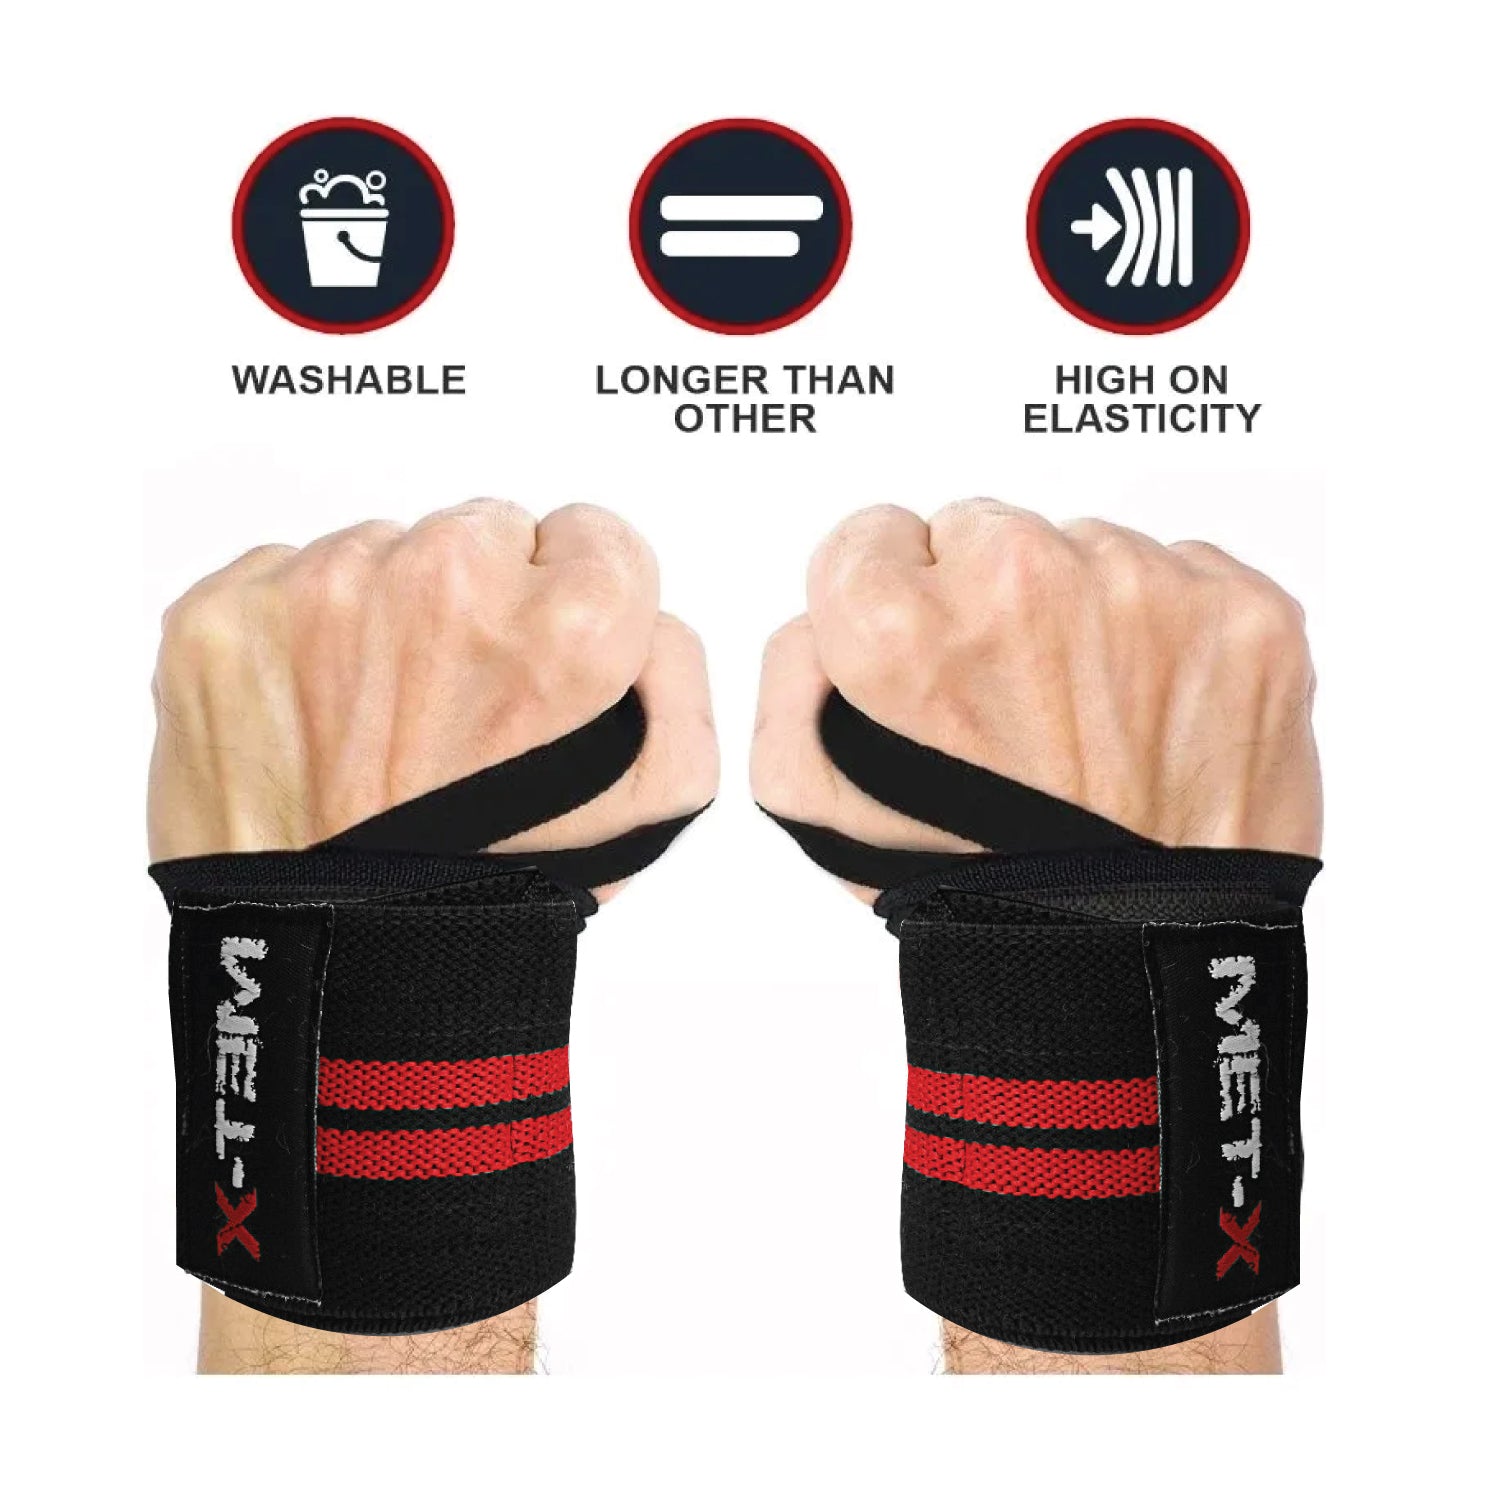 Wrist Straps for Weightlifting - Premium weight lifting wrist support  wraps, Weight Lifting Wrist Wraps Bandage Hand Support Gym Straps Brace  Cotton